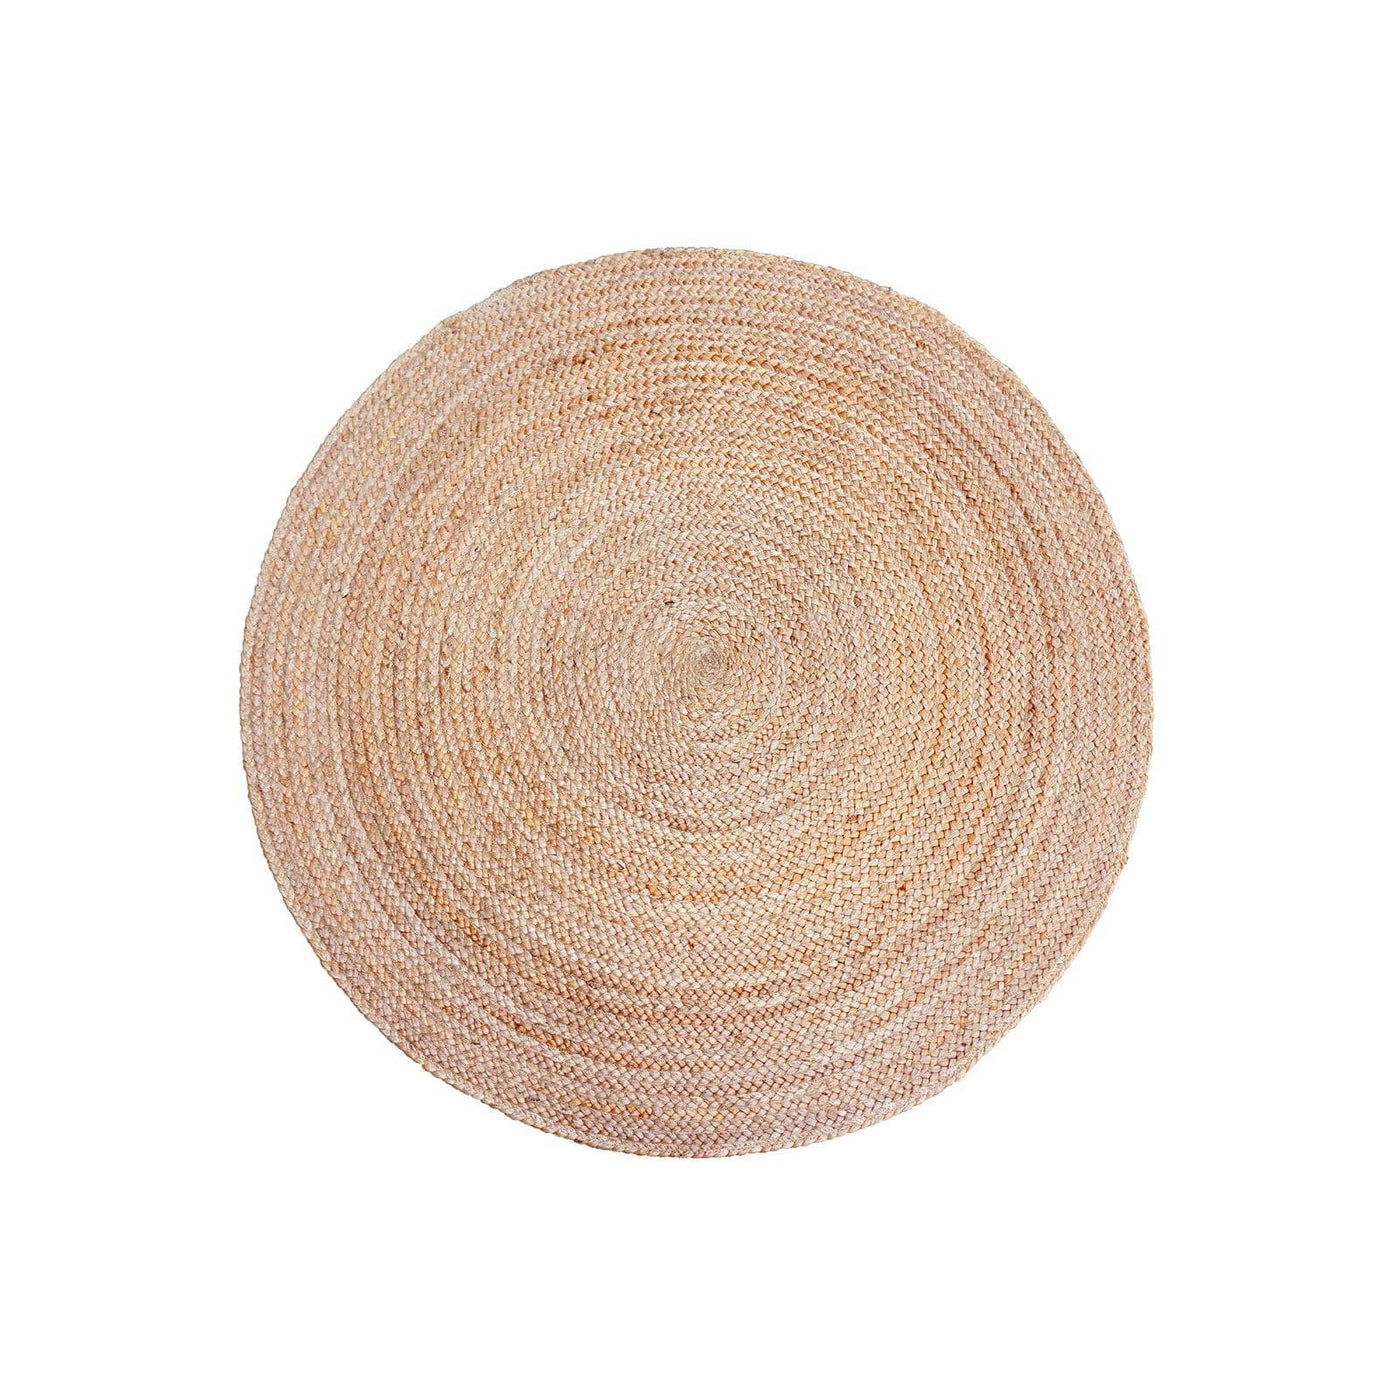 Hey Jute Round Handwoven Area Rug, Natural, 160x160 cm 1